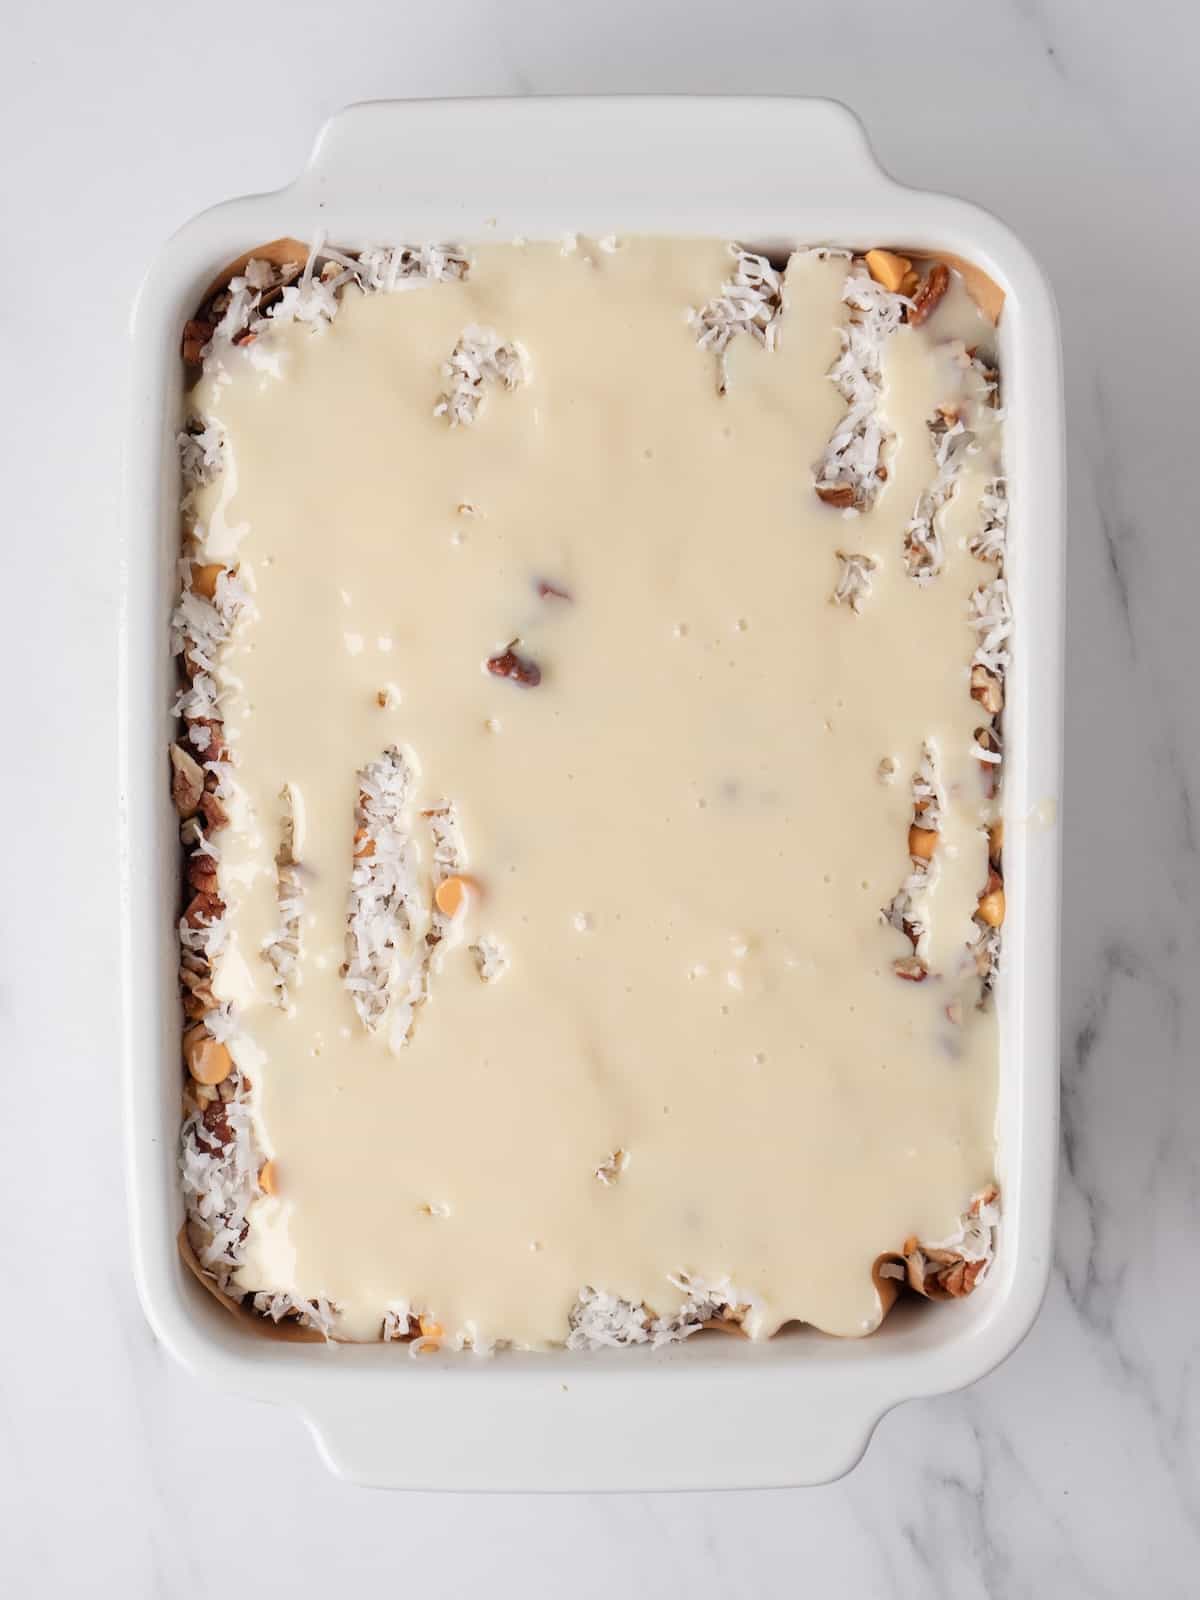 A white rectangular pan with brownies just baked, and topped with chocolate chips, butterscotch chips, pecan pieces, shredded coconut and evenly drizzled with the sweetened condensed milk.